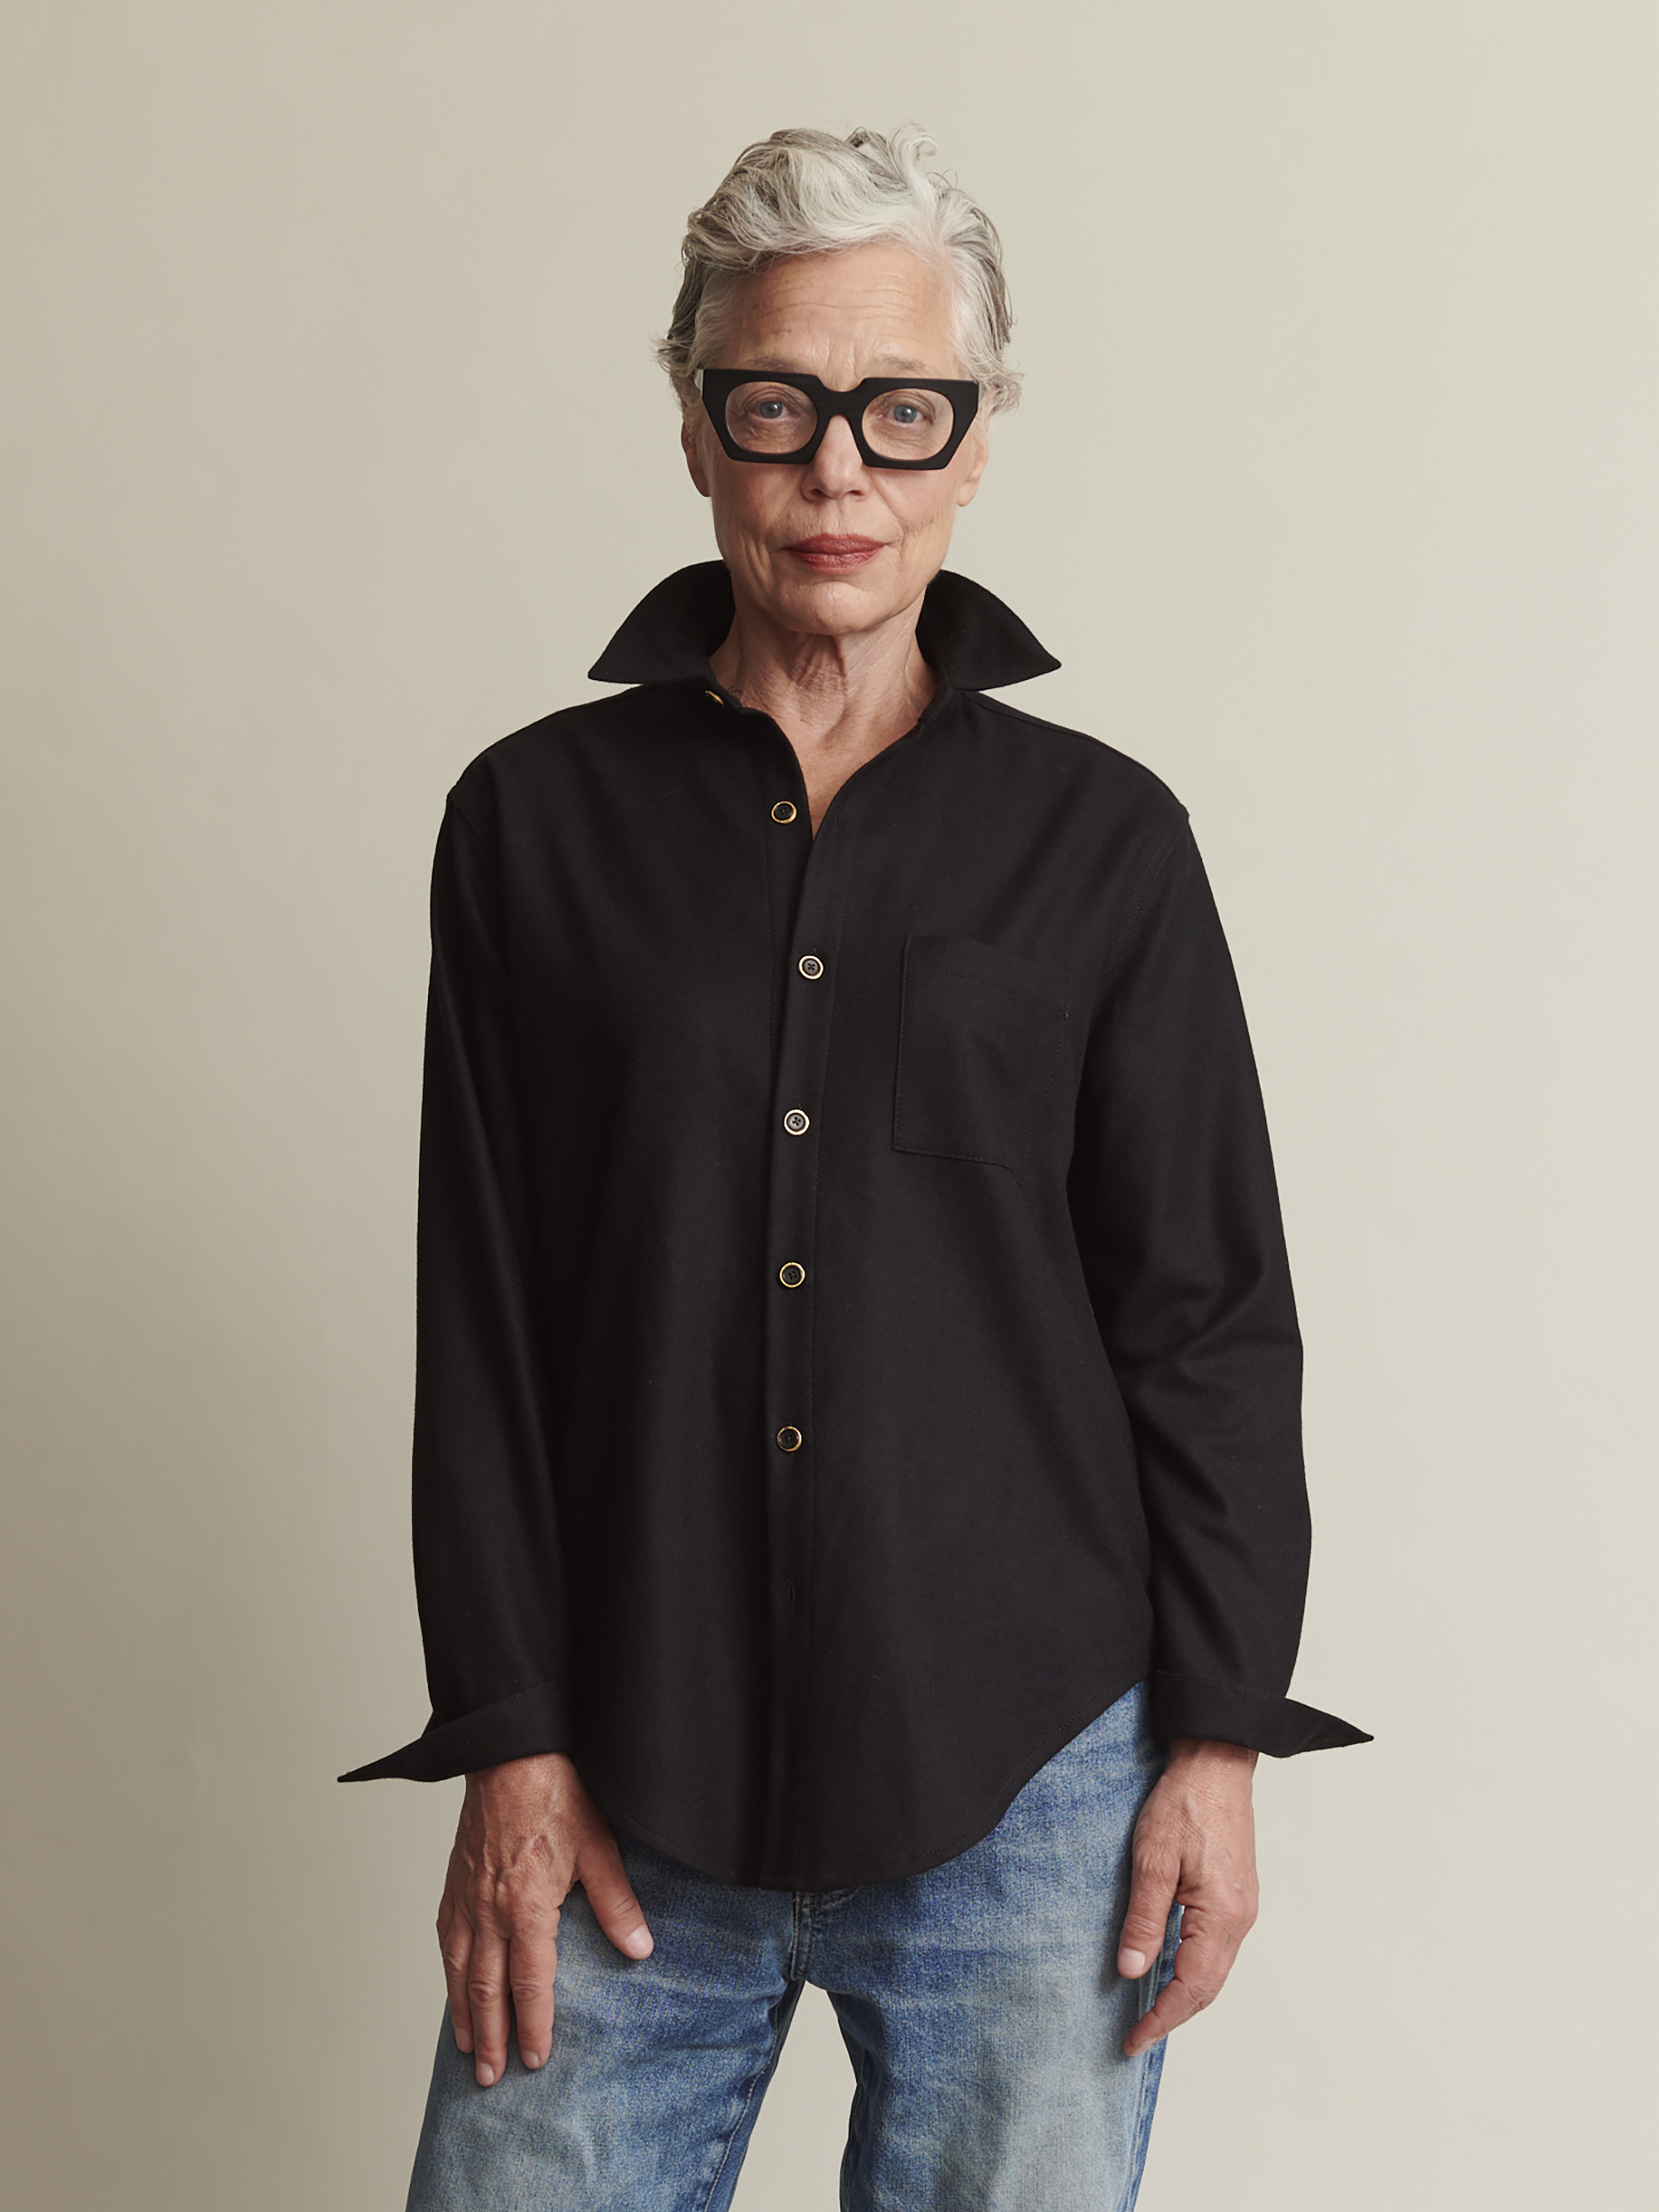 The New Oxford Shirt in Special-Edition Black Merino Wool | NAOMI NOMI